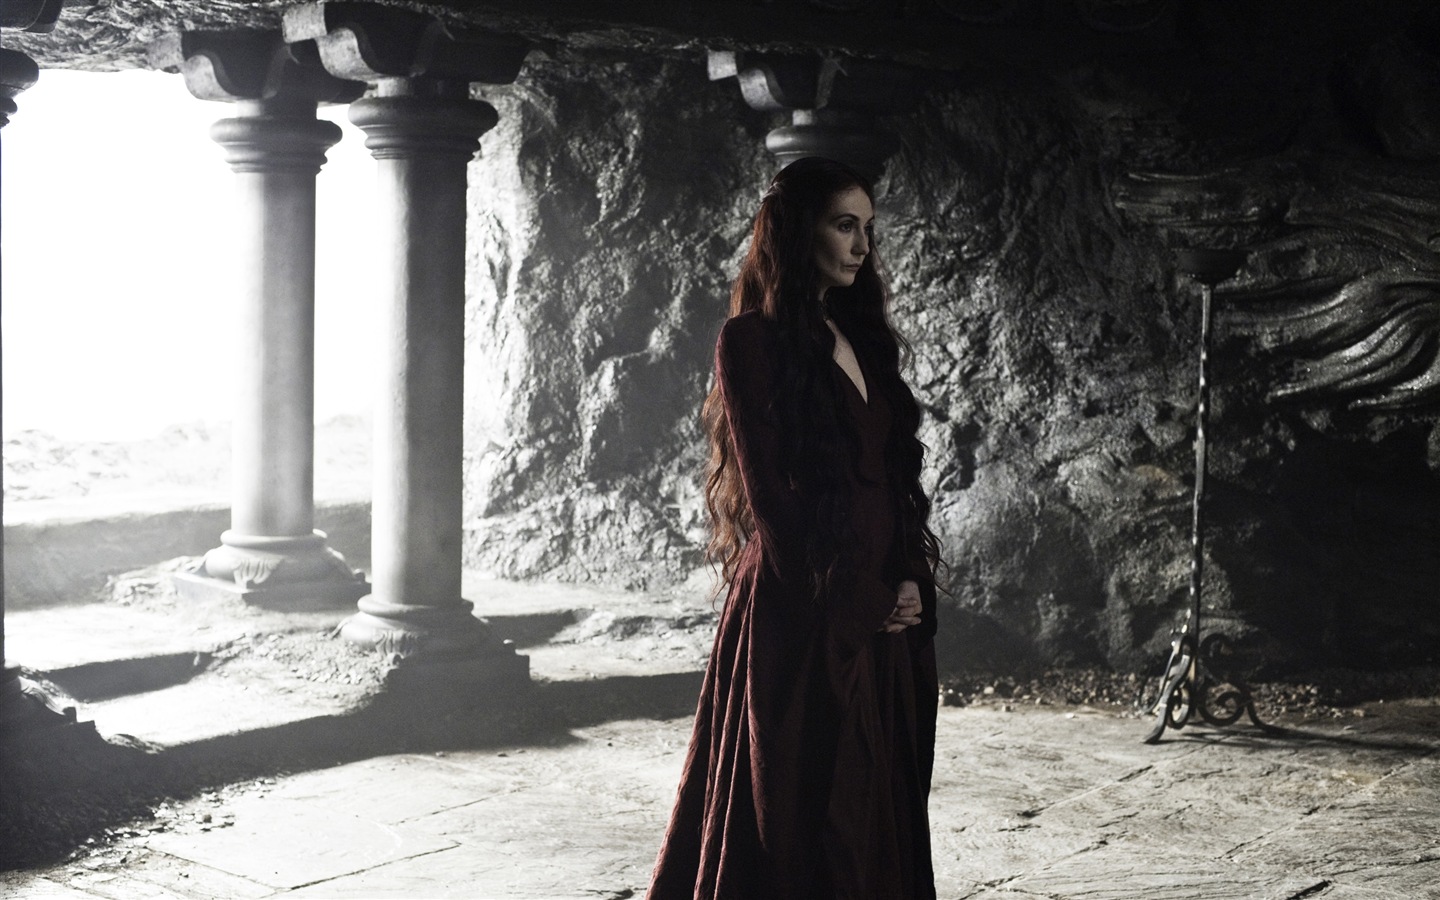 A Song of Ice and Fire: Game of Thrones 冰與火之歌：權力的遊戲高清壁紙 #34 - 1440x900